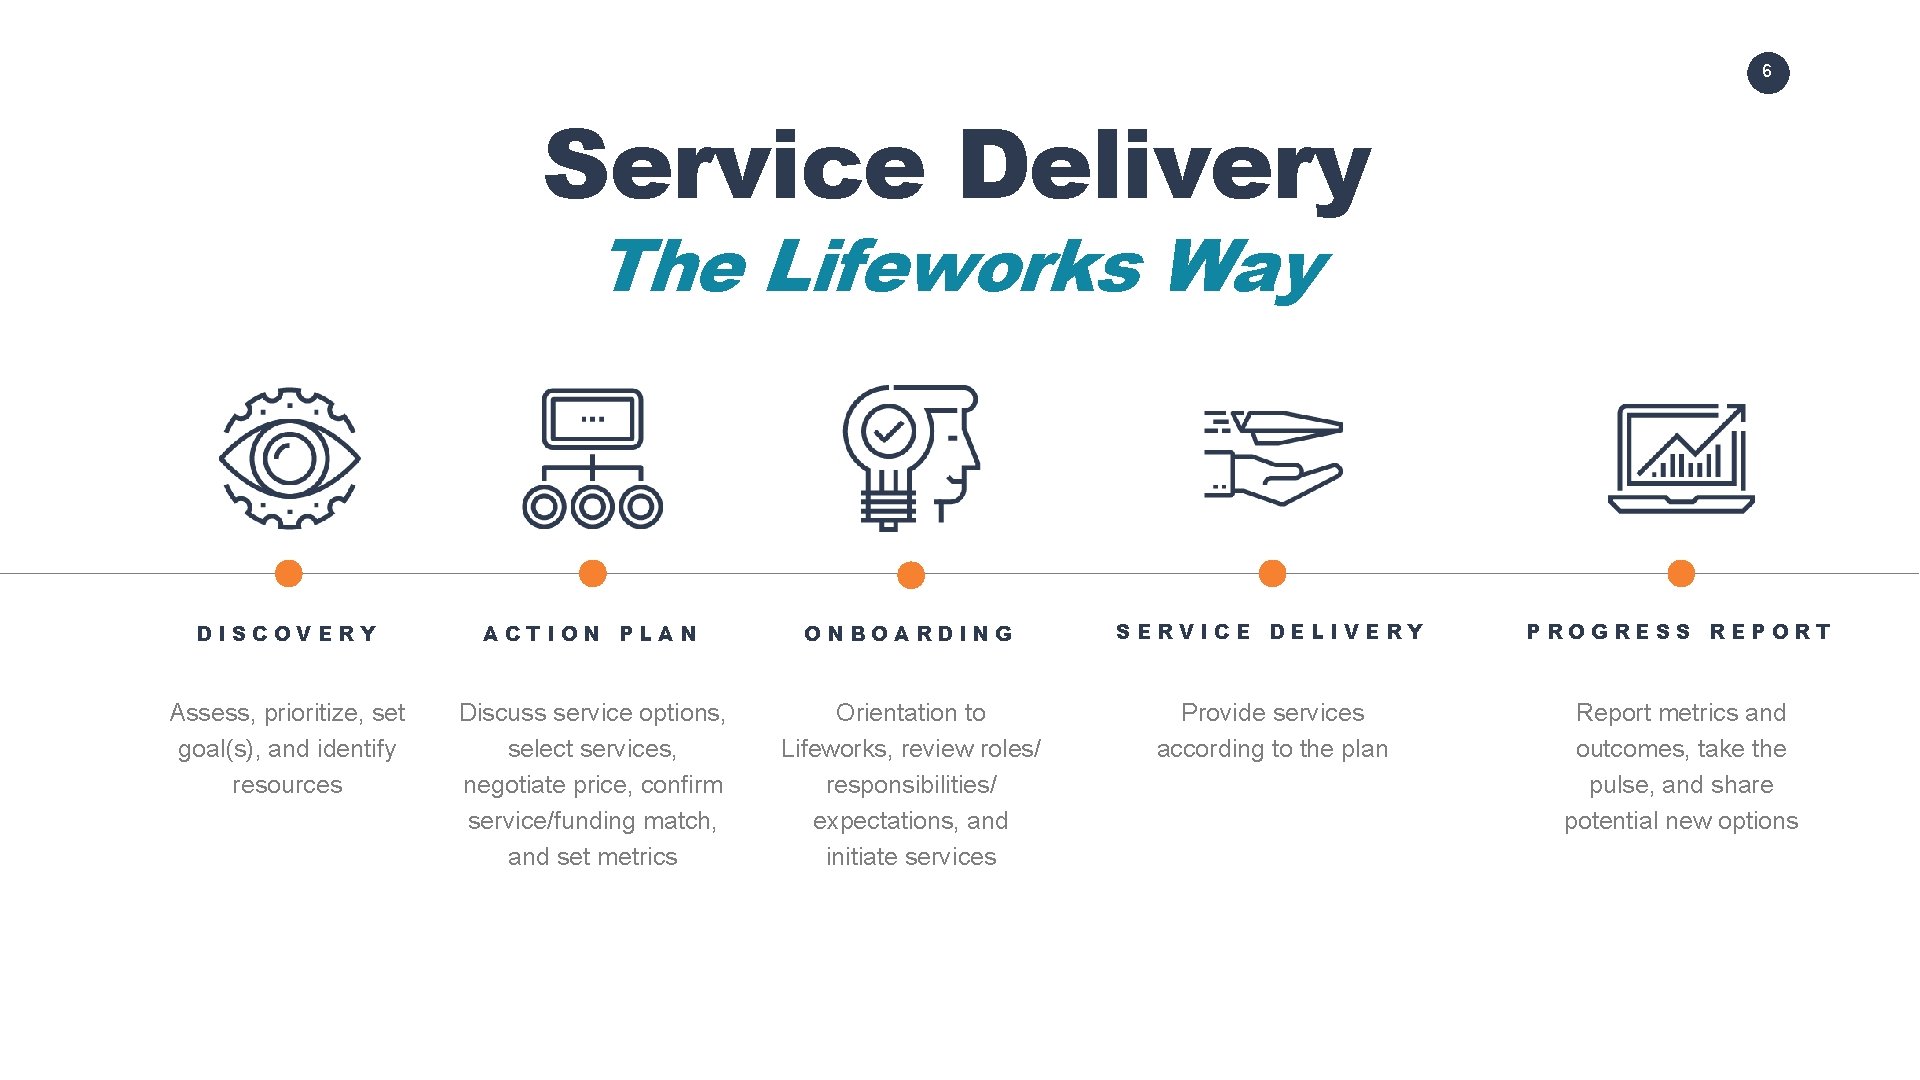 6 Service Delivery The Lifeworks Way DISCOVERY ACTION PLAN ONBOARDING SERVICE DELIVERY PROGRESS REPORT